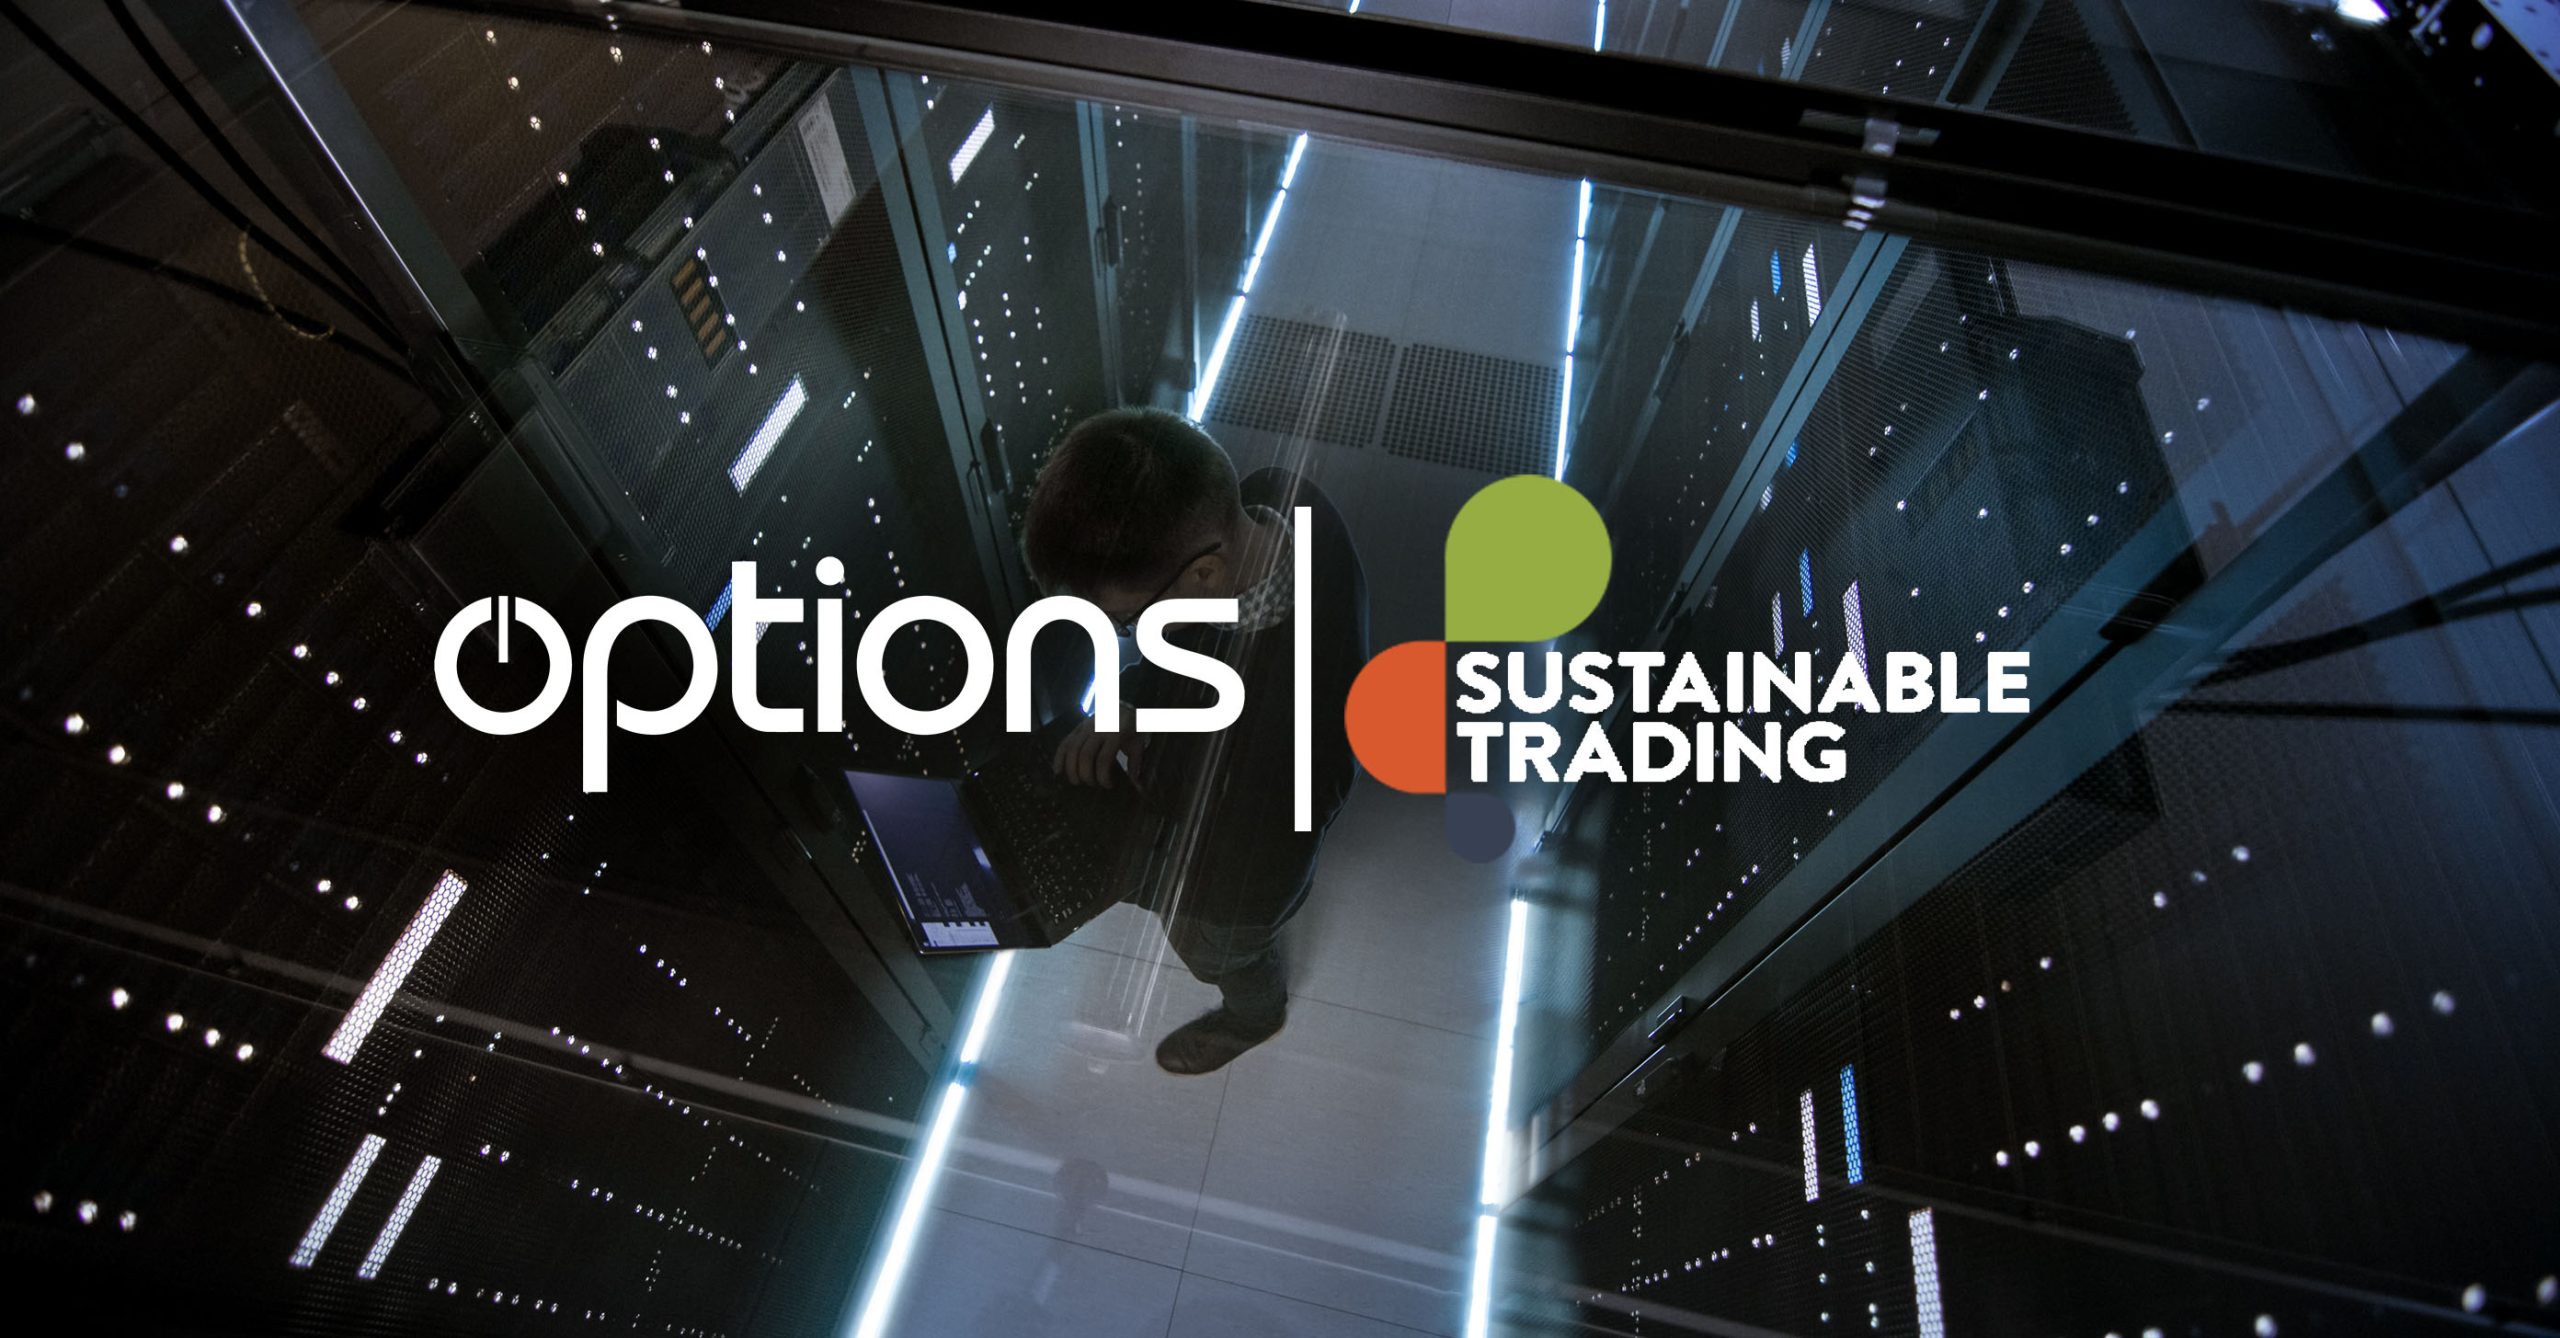 You are currently viewing Options Announced As Founding Member of Newly Launched “Sustainable Trading” Membership Network